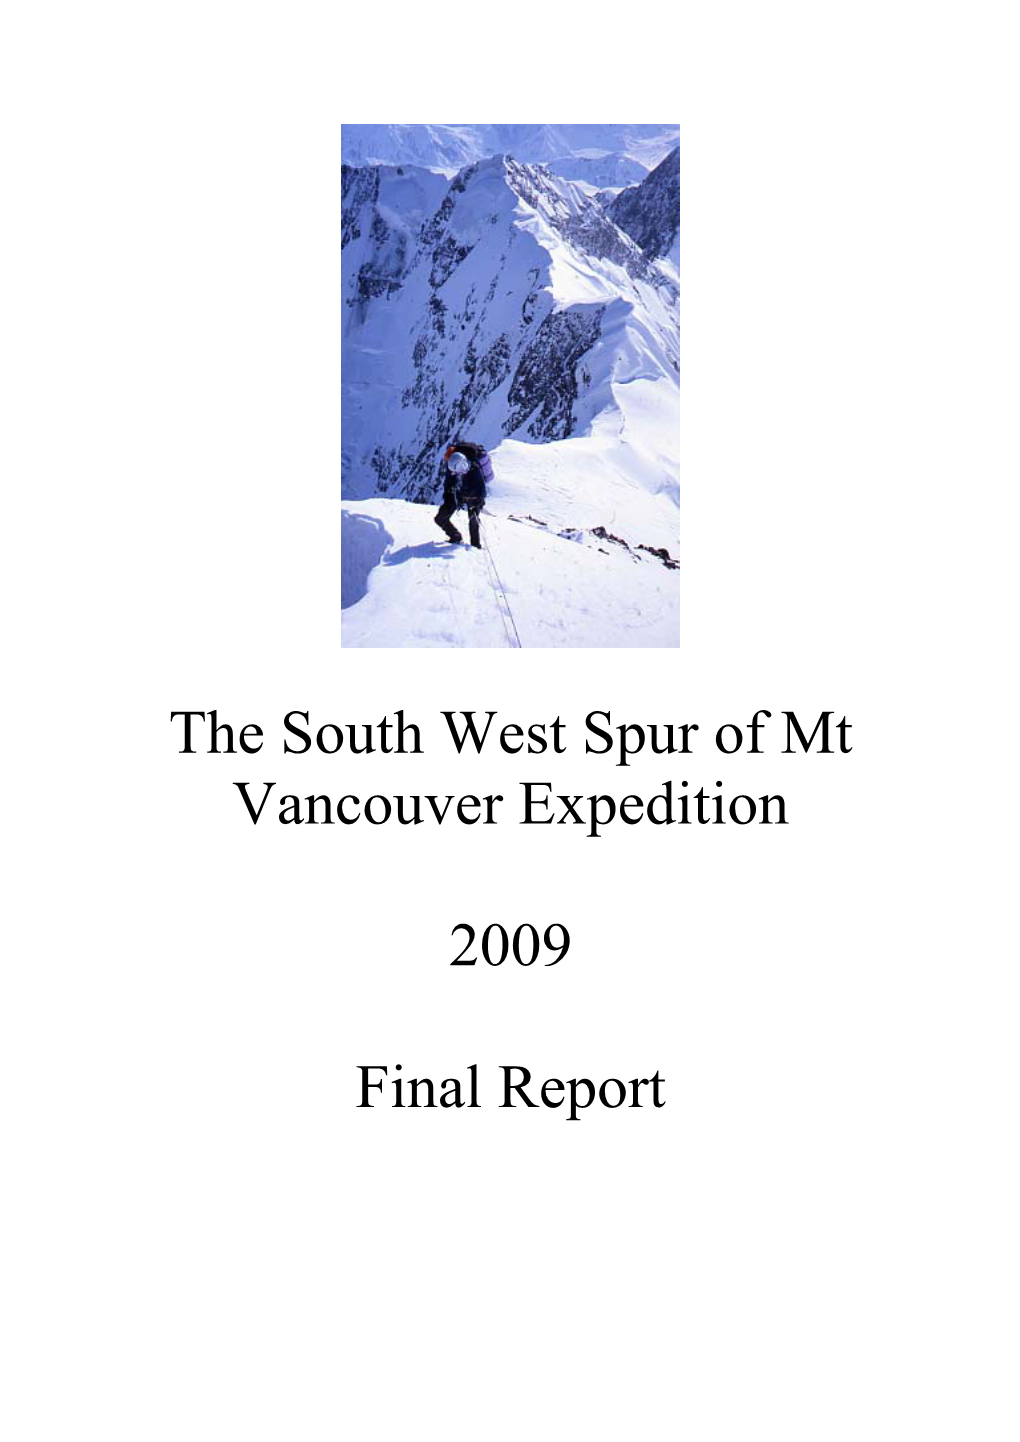 The South West Spur of Mt Vancouver Expedition